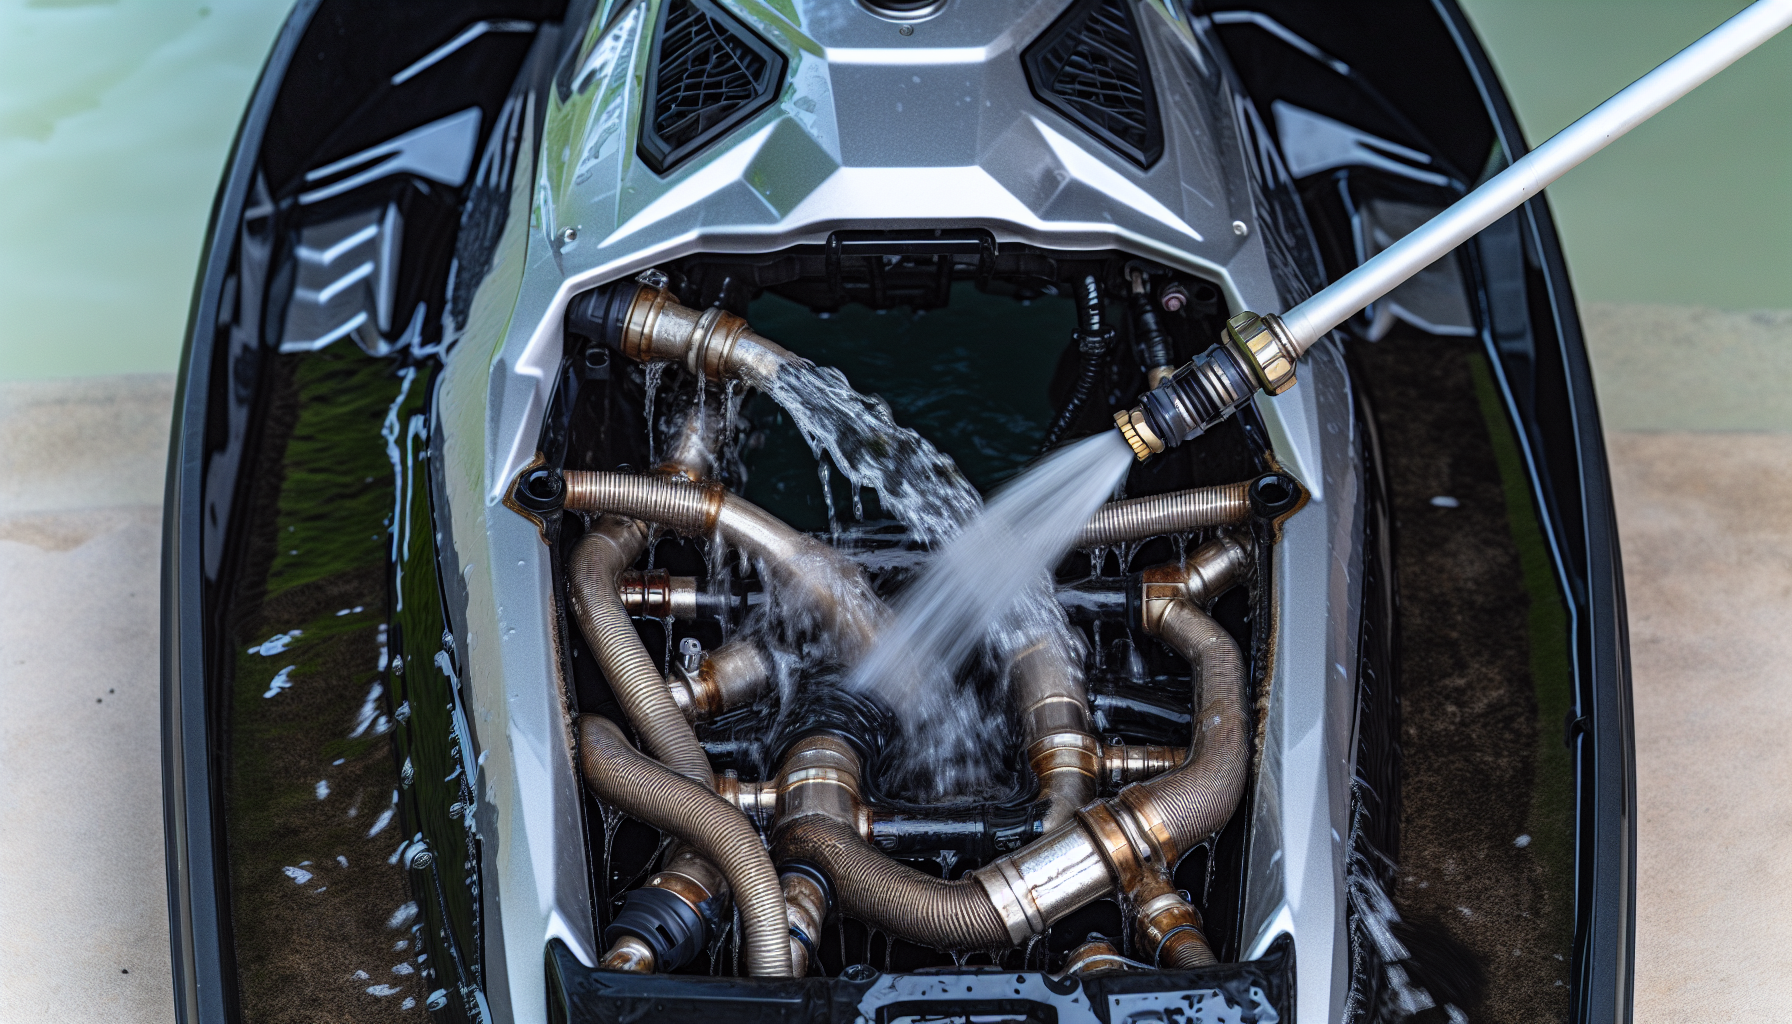 A jet ski cooling system being flushed with clean water